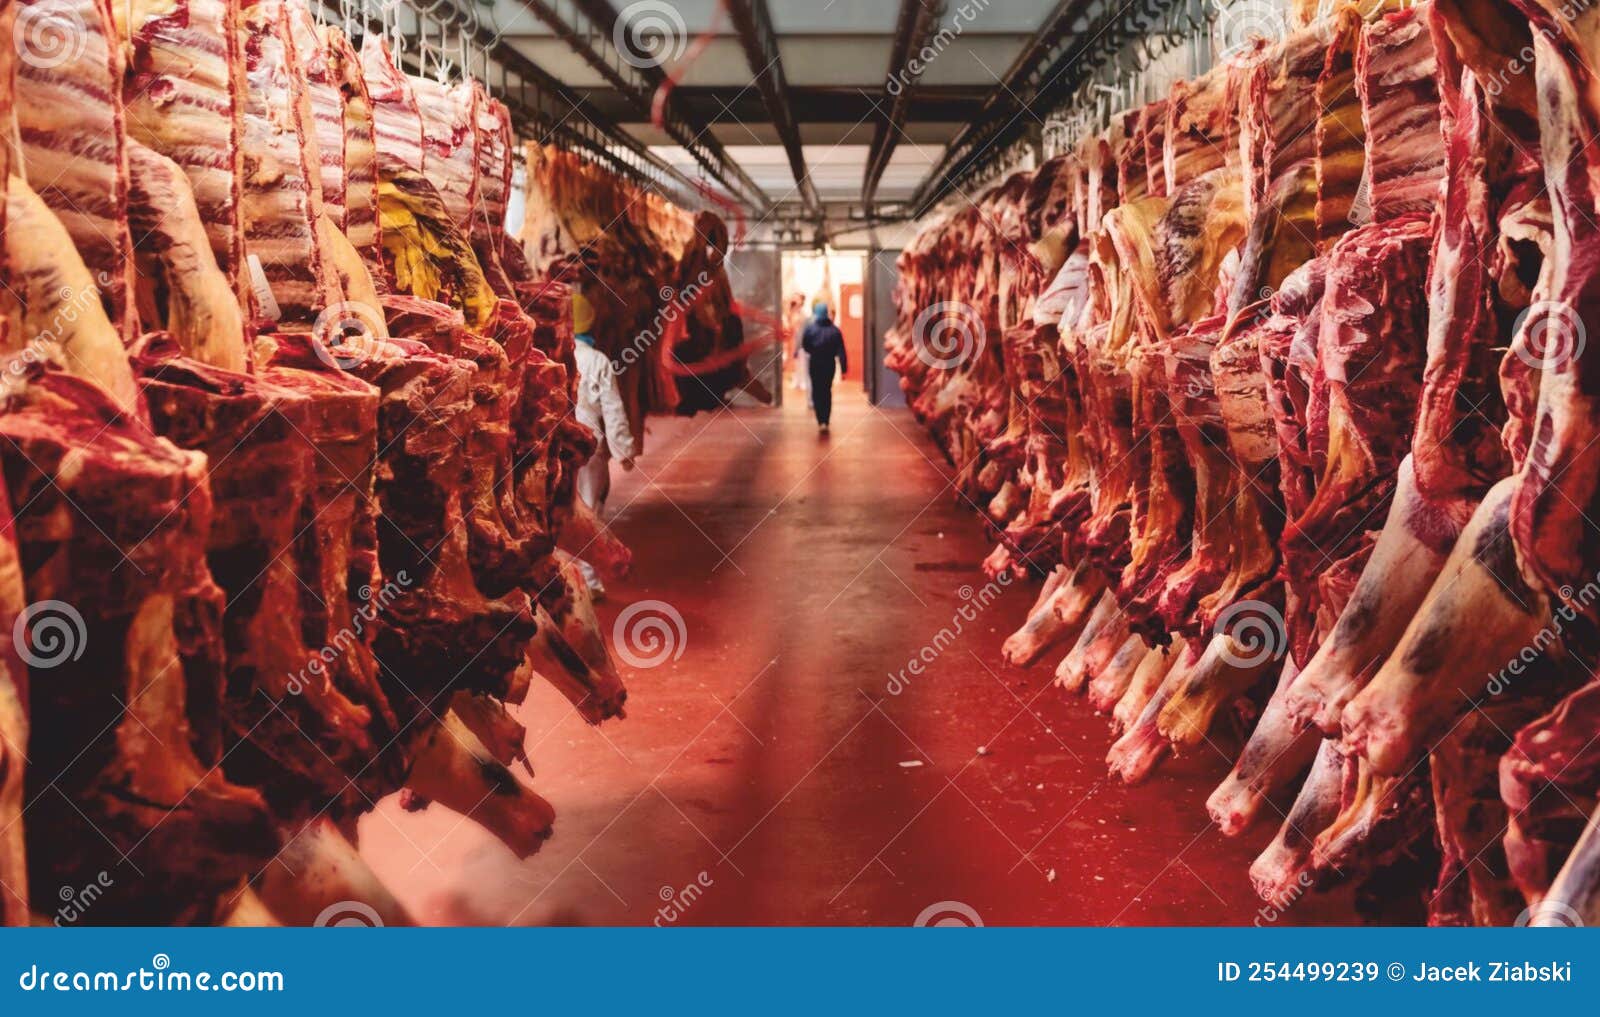 Beef Half Carcasses Hanging on Hooks in the Slaughterhouse. Meat